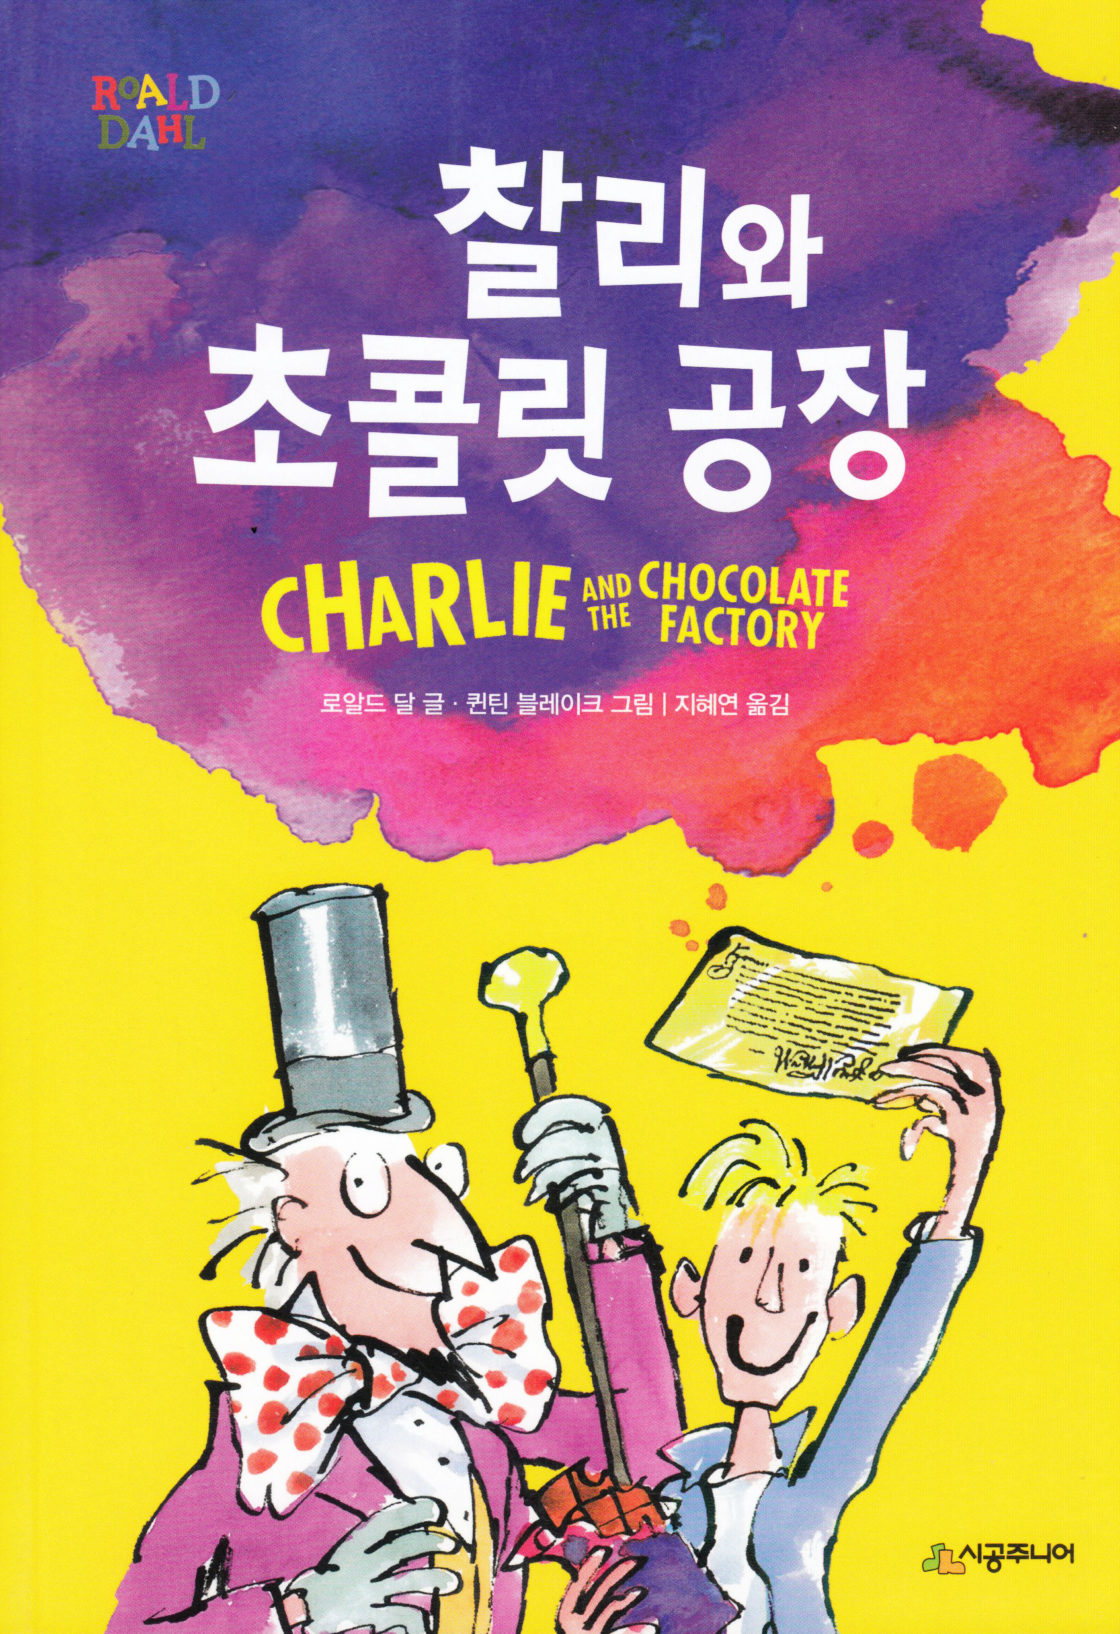 Charlie and the Chocolate Factory (Korean)